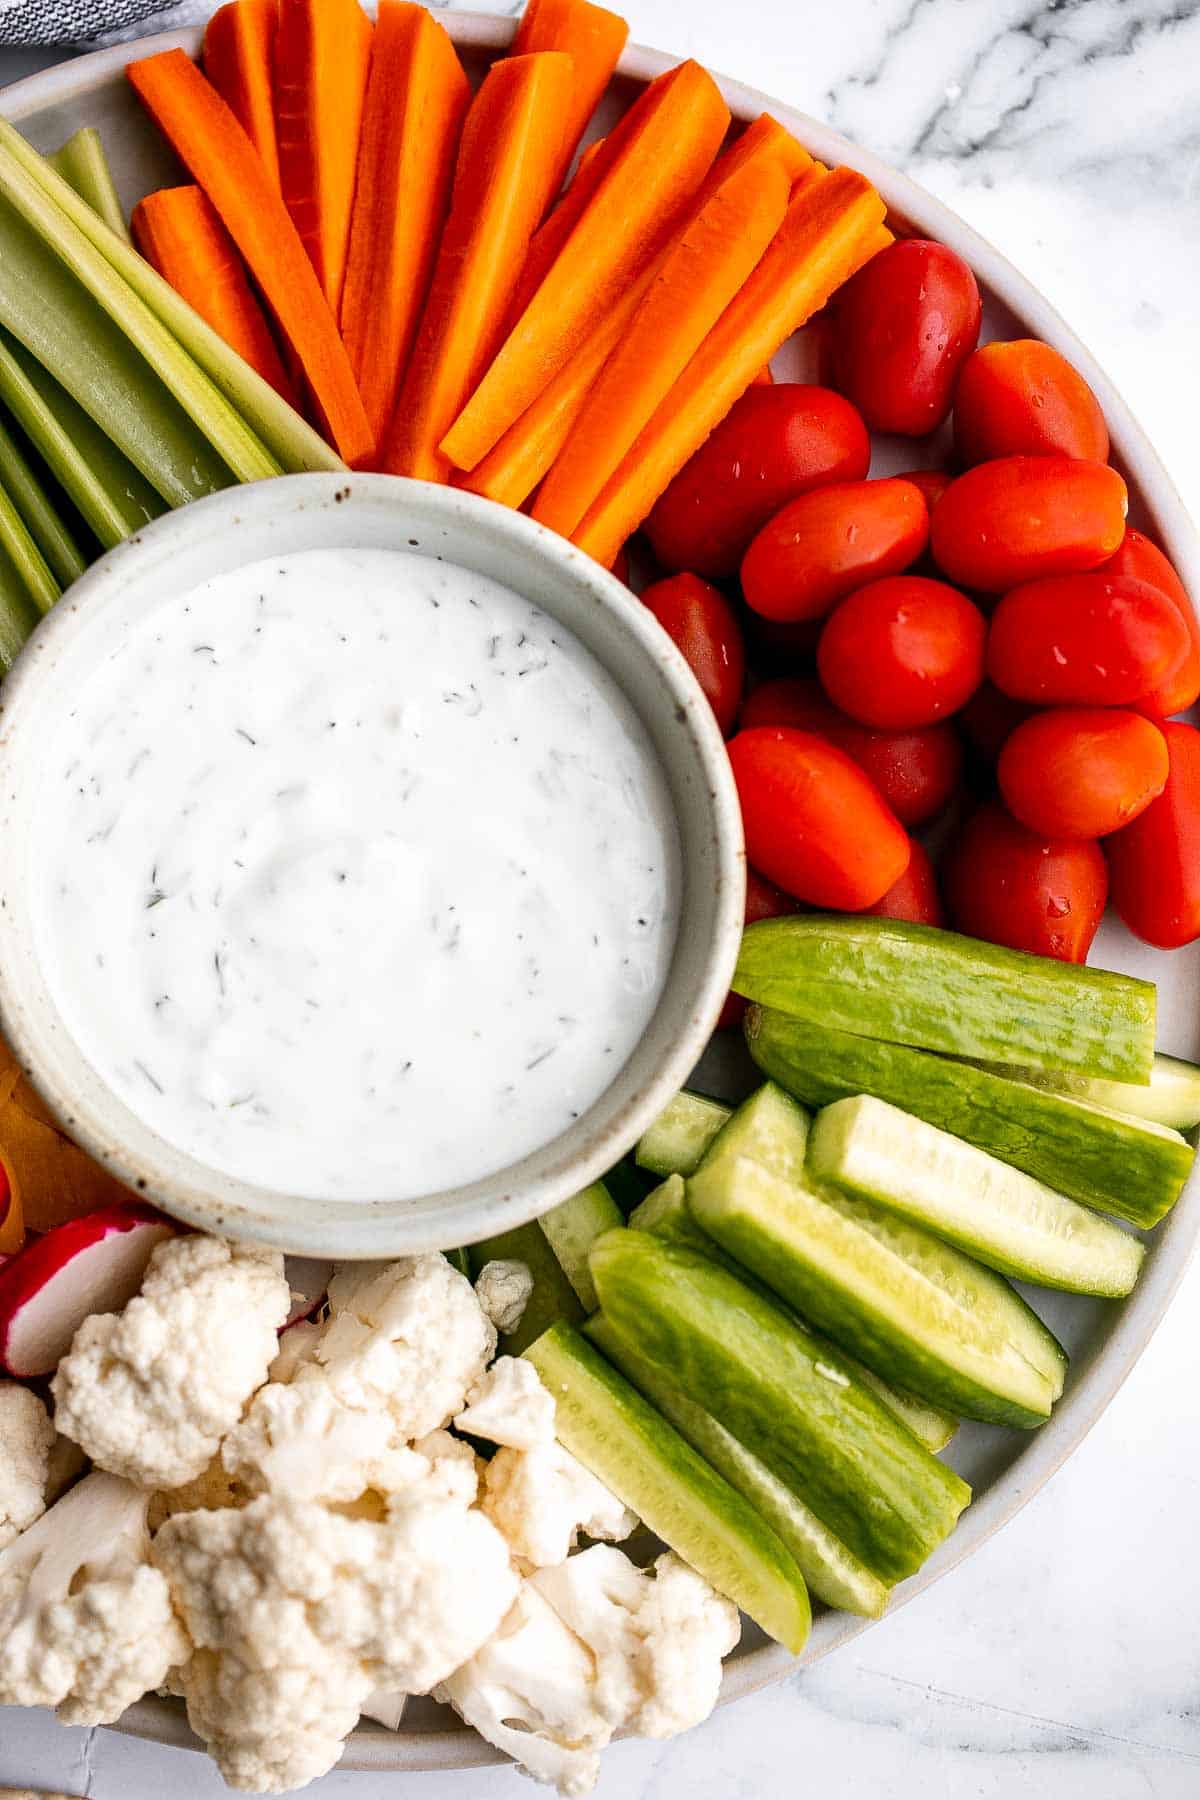 Homemade ranch dip is creamy, tangy, flavorful, and delicious. This classic dip is easy to make at home in minutes, and is so much better than store-bought. | aheadofthyme.com